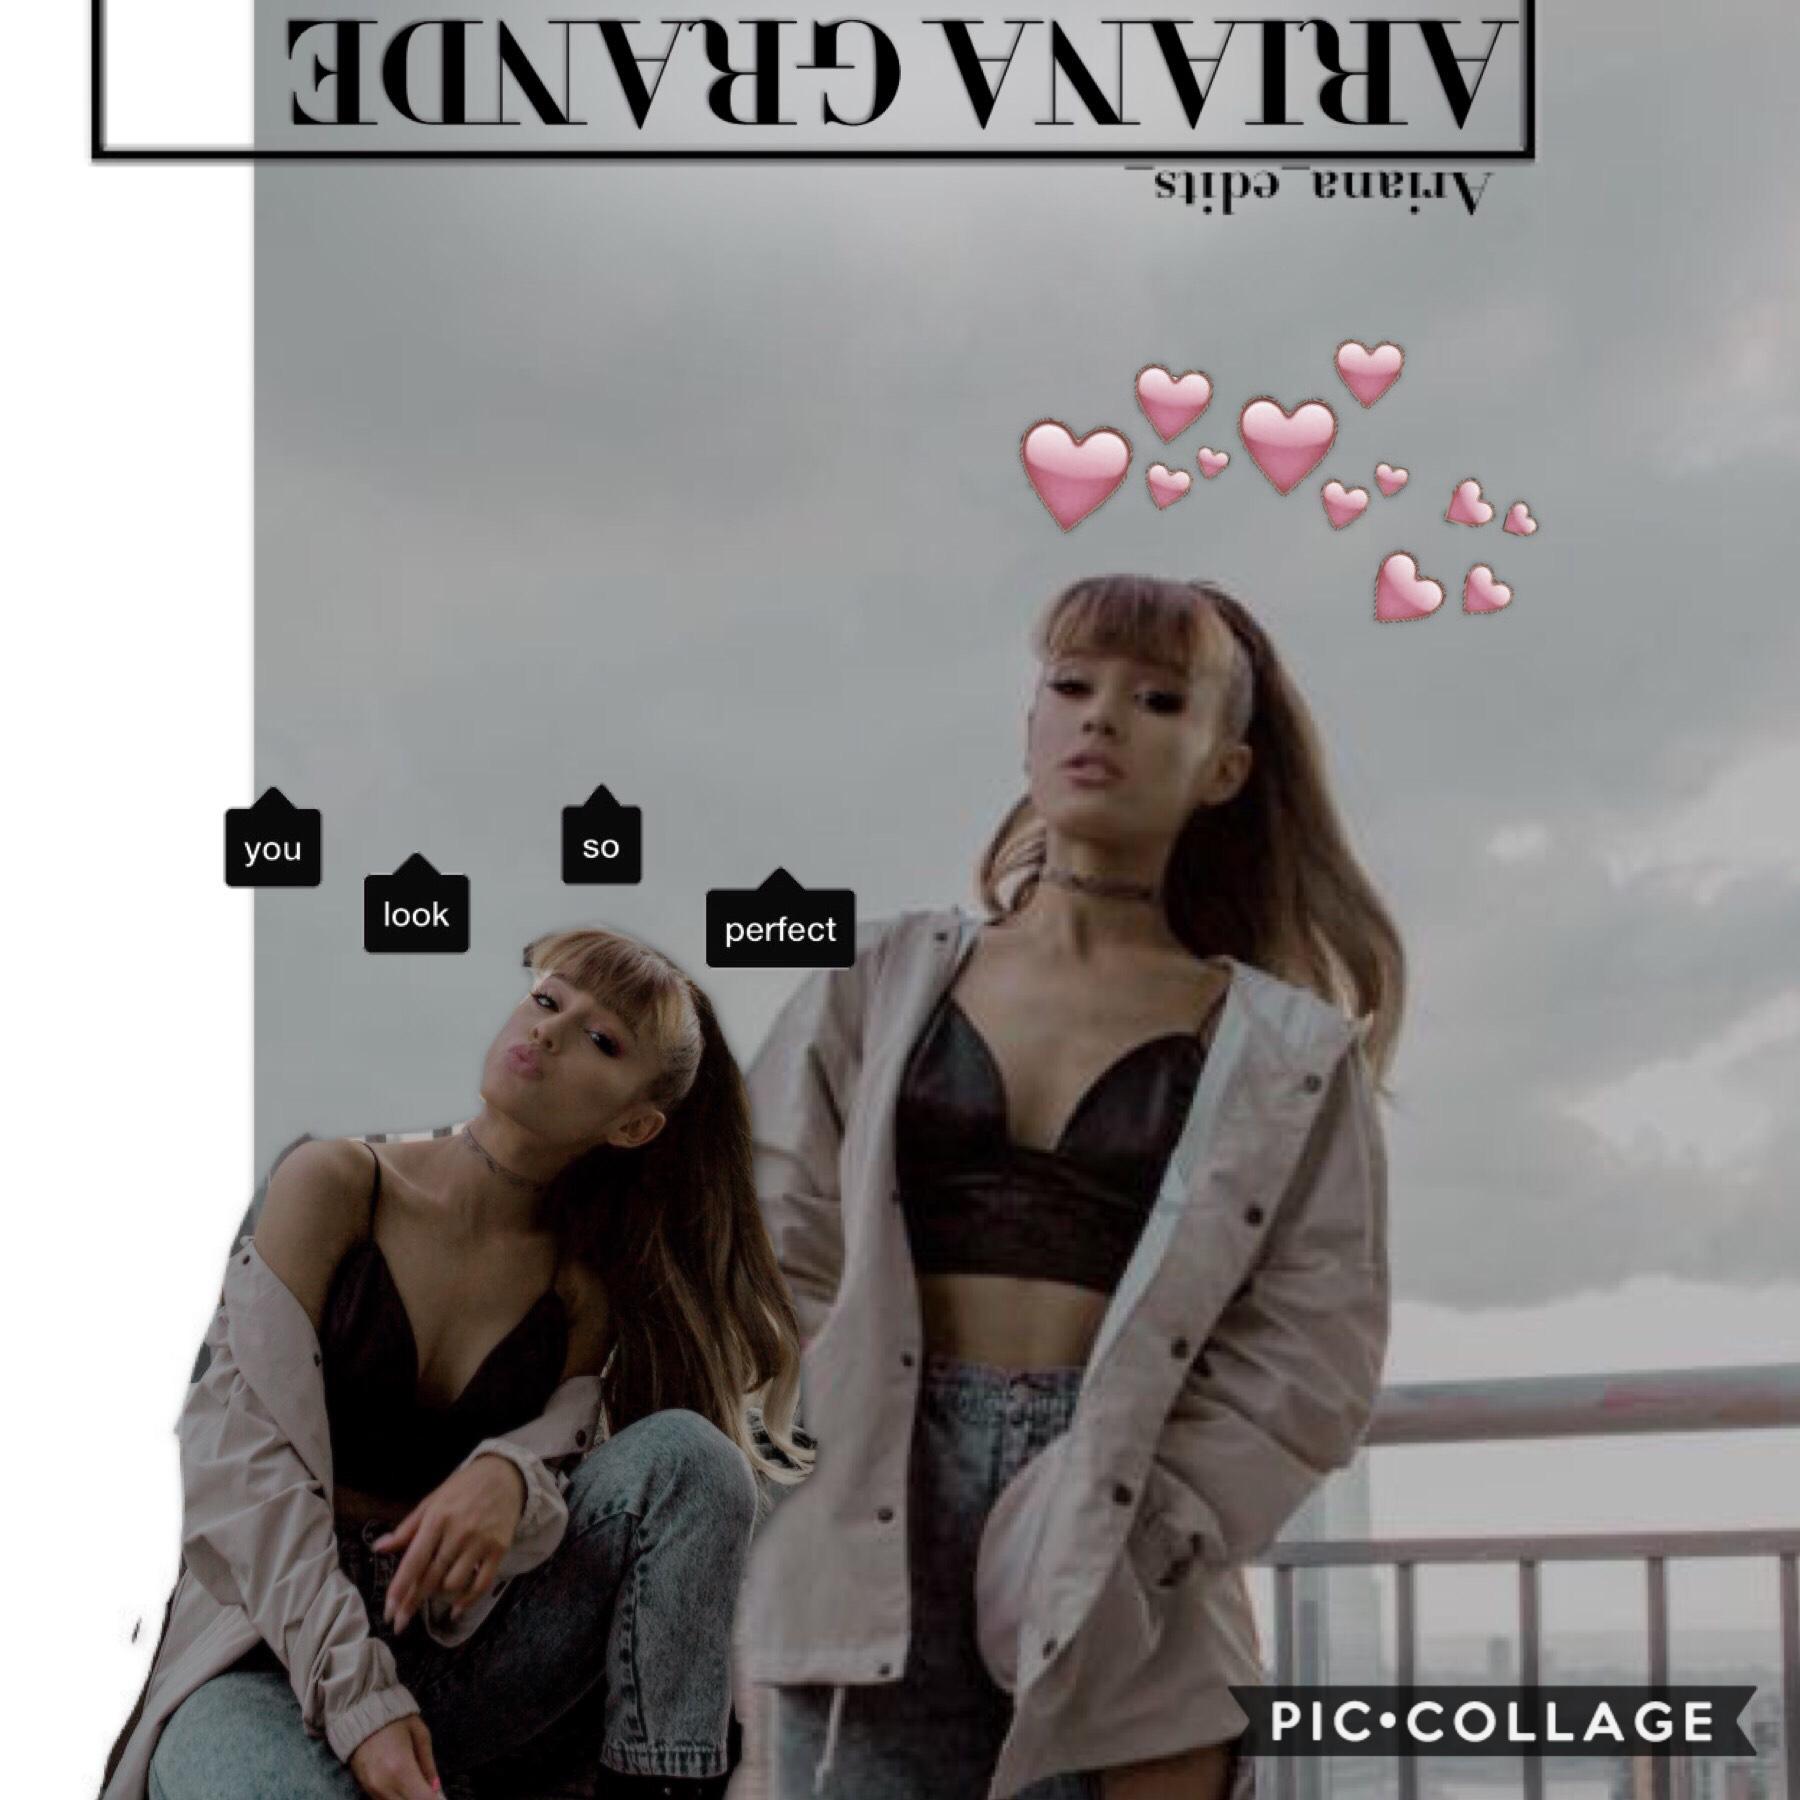 Tap here🍉


Hey guys I’m new so if you love ari please show some love! I know this isn’t the greatest edit but it’s my first so please no hate!❤️